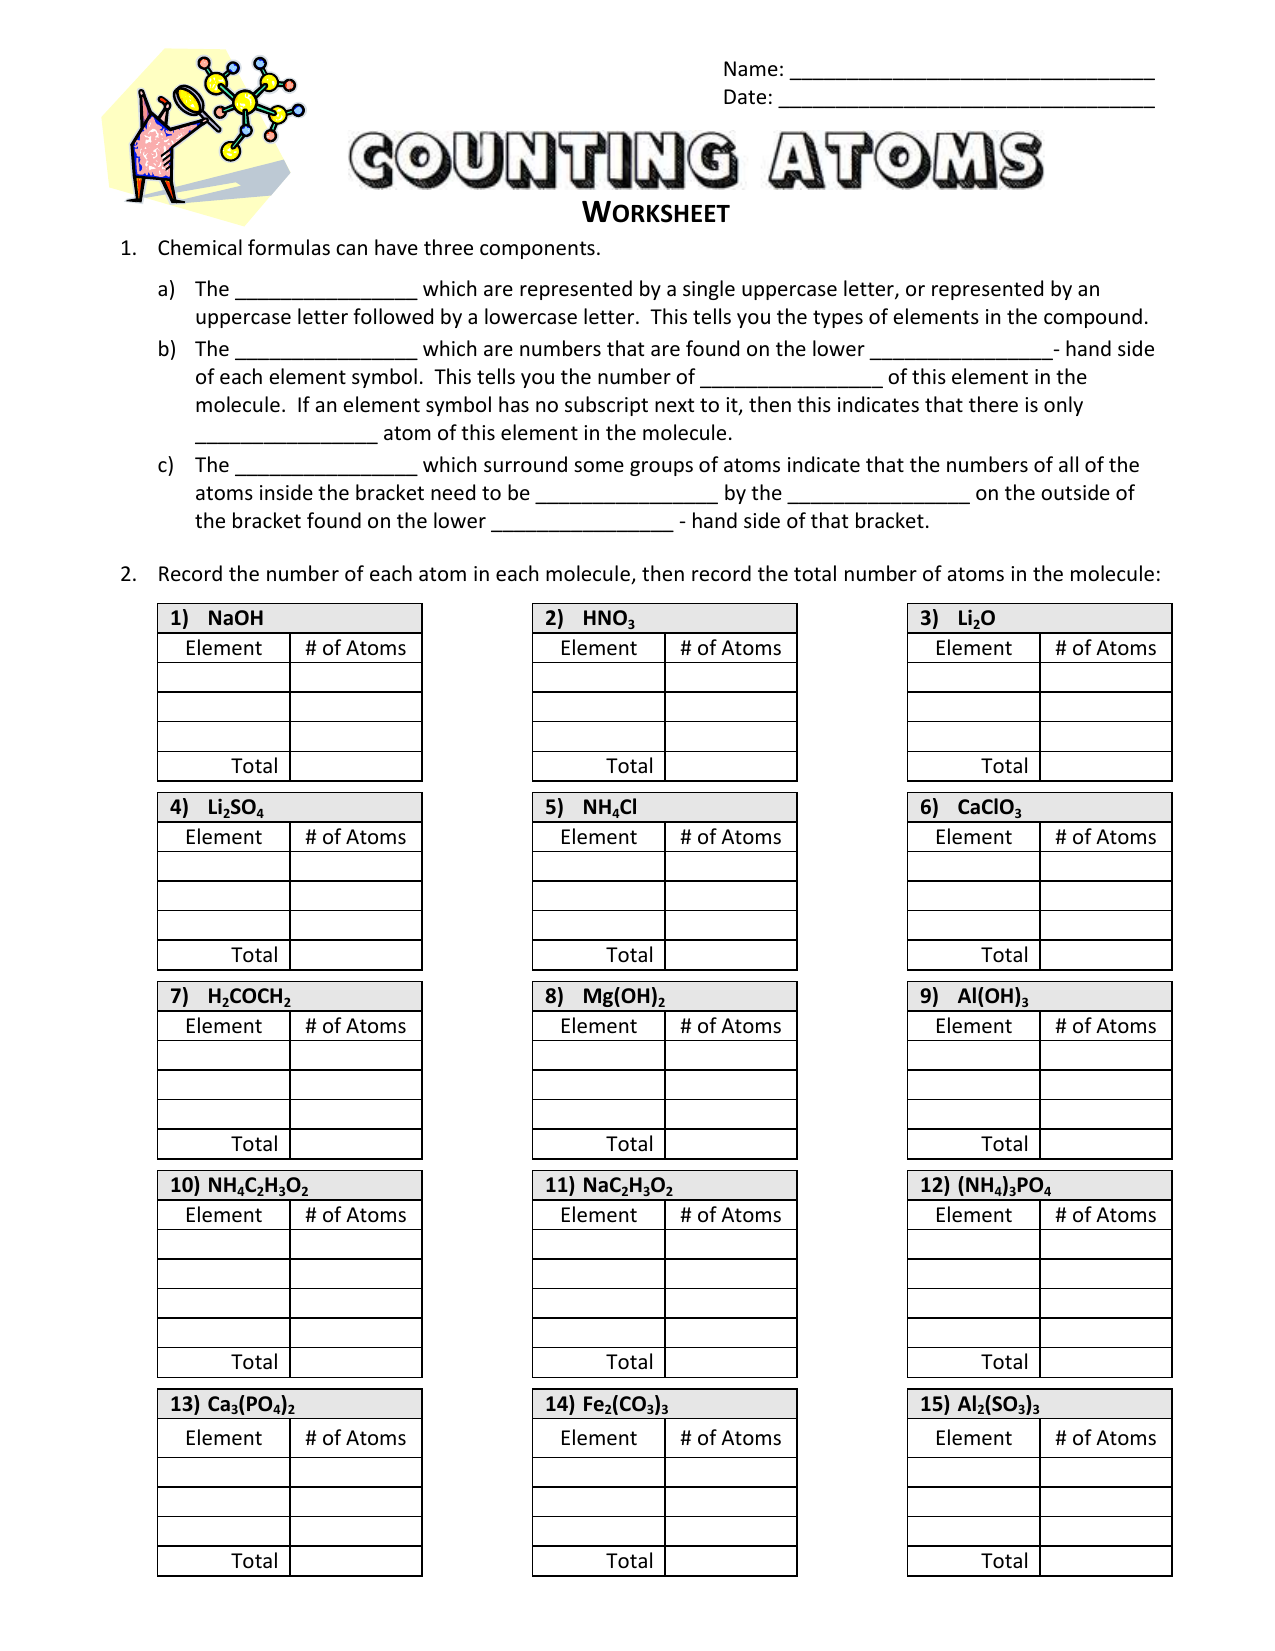 Counting Atoms - Worksheet Pertaining To Counting Atoms Worksheet Answers